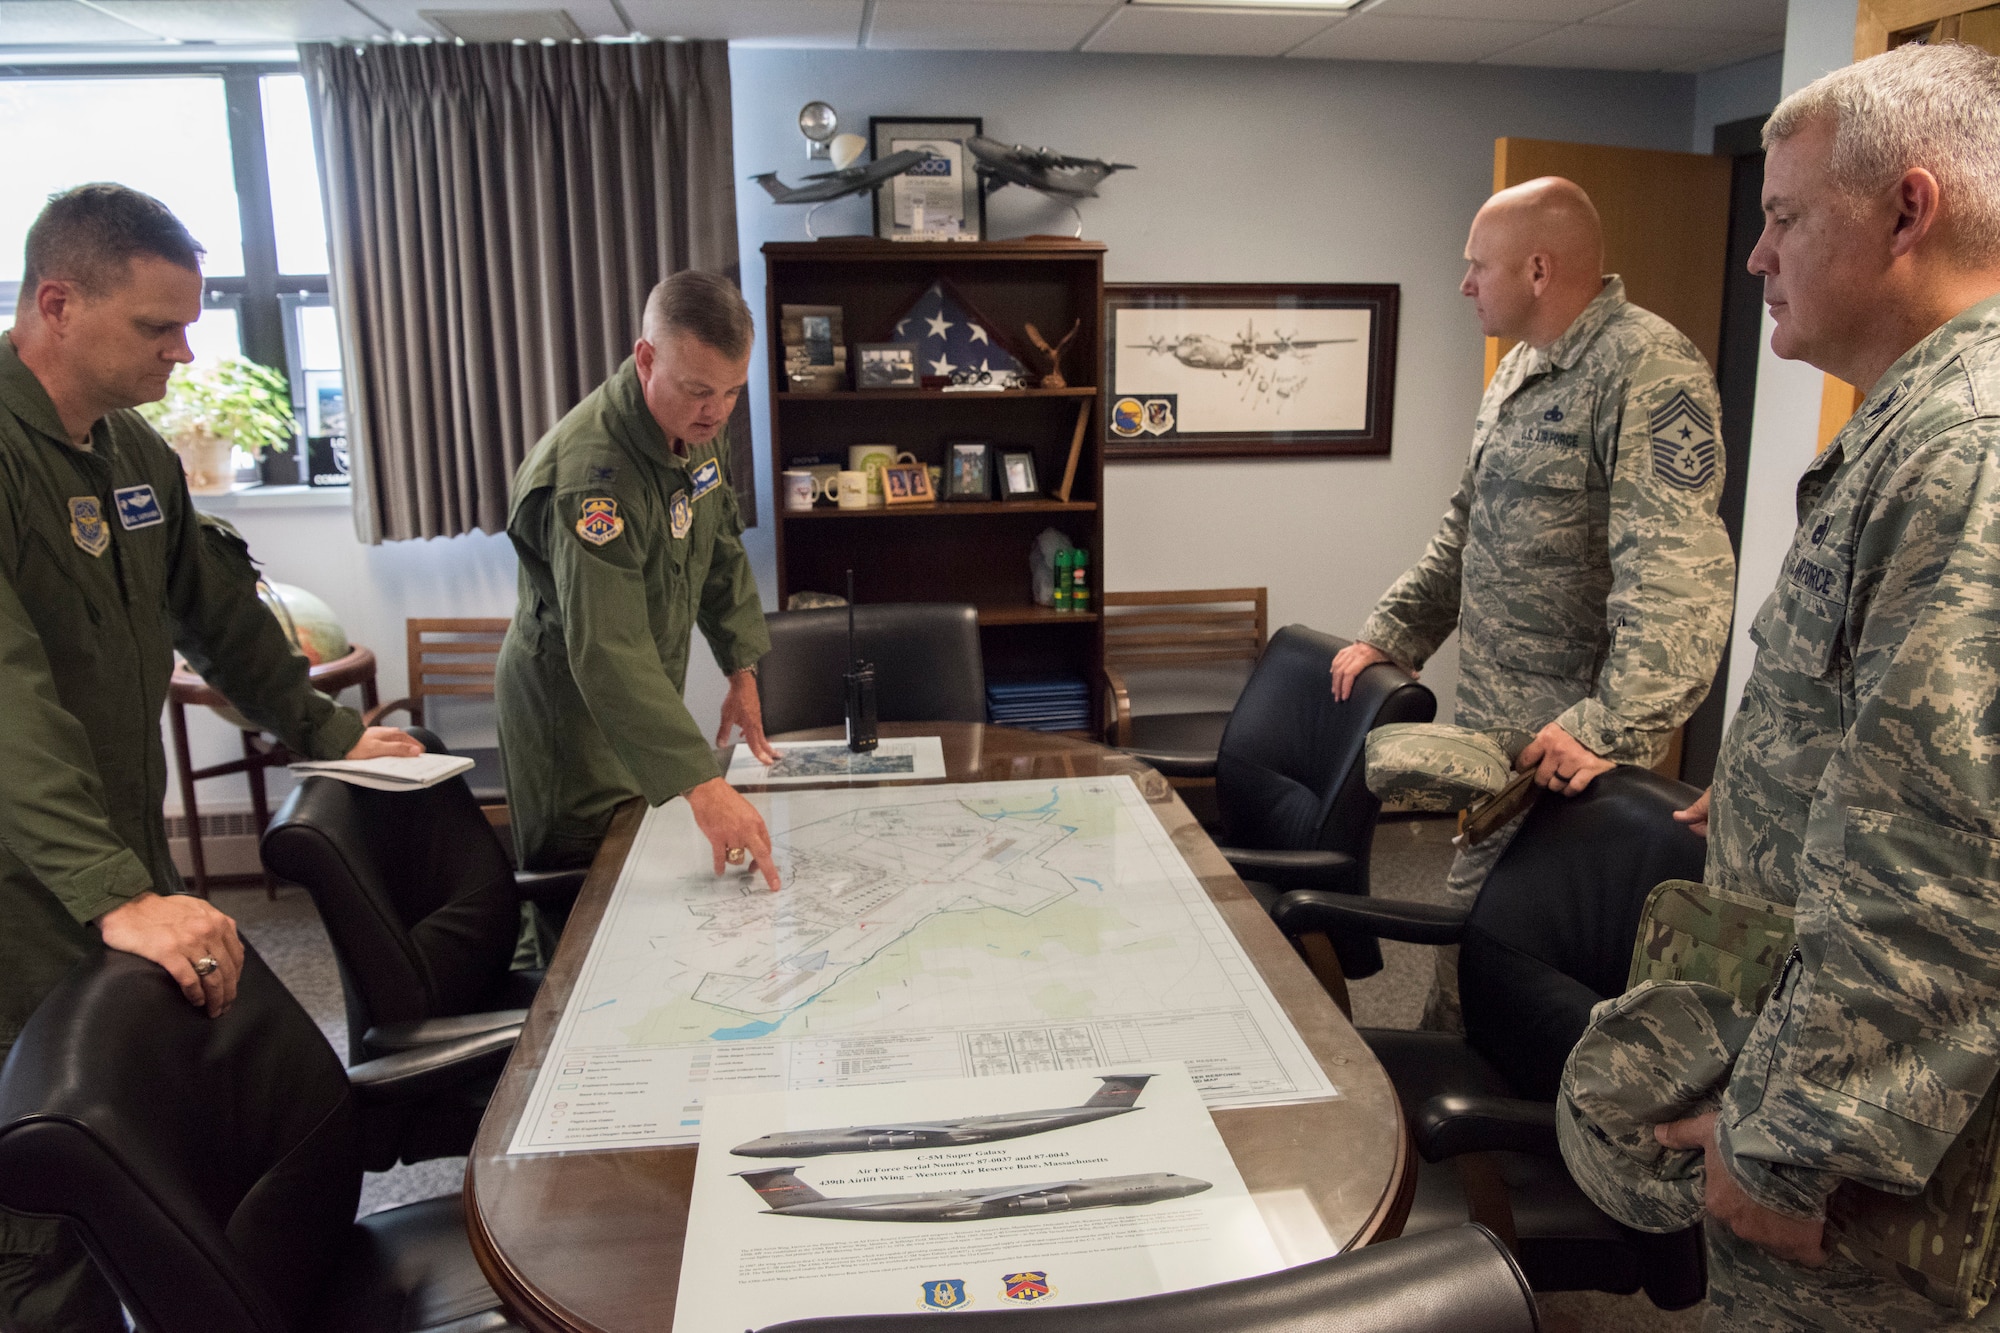 Col. D. Scott Durham, 439th Airlift Wing commander, points out places of interest on an aerial map of Westover Air Reserve Base to 436th Airlift Wing leadership Aug. 22, 2018, at Westover ARB, Mass. Westover is the largest Air Force Reserve base in the United States, employing more than 5,500 military and civilian personnel.  (U.S. Air Force photo by Staff Sgt. Zoe Russell)